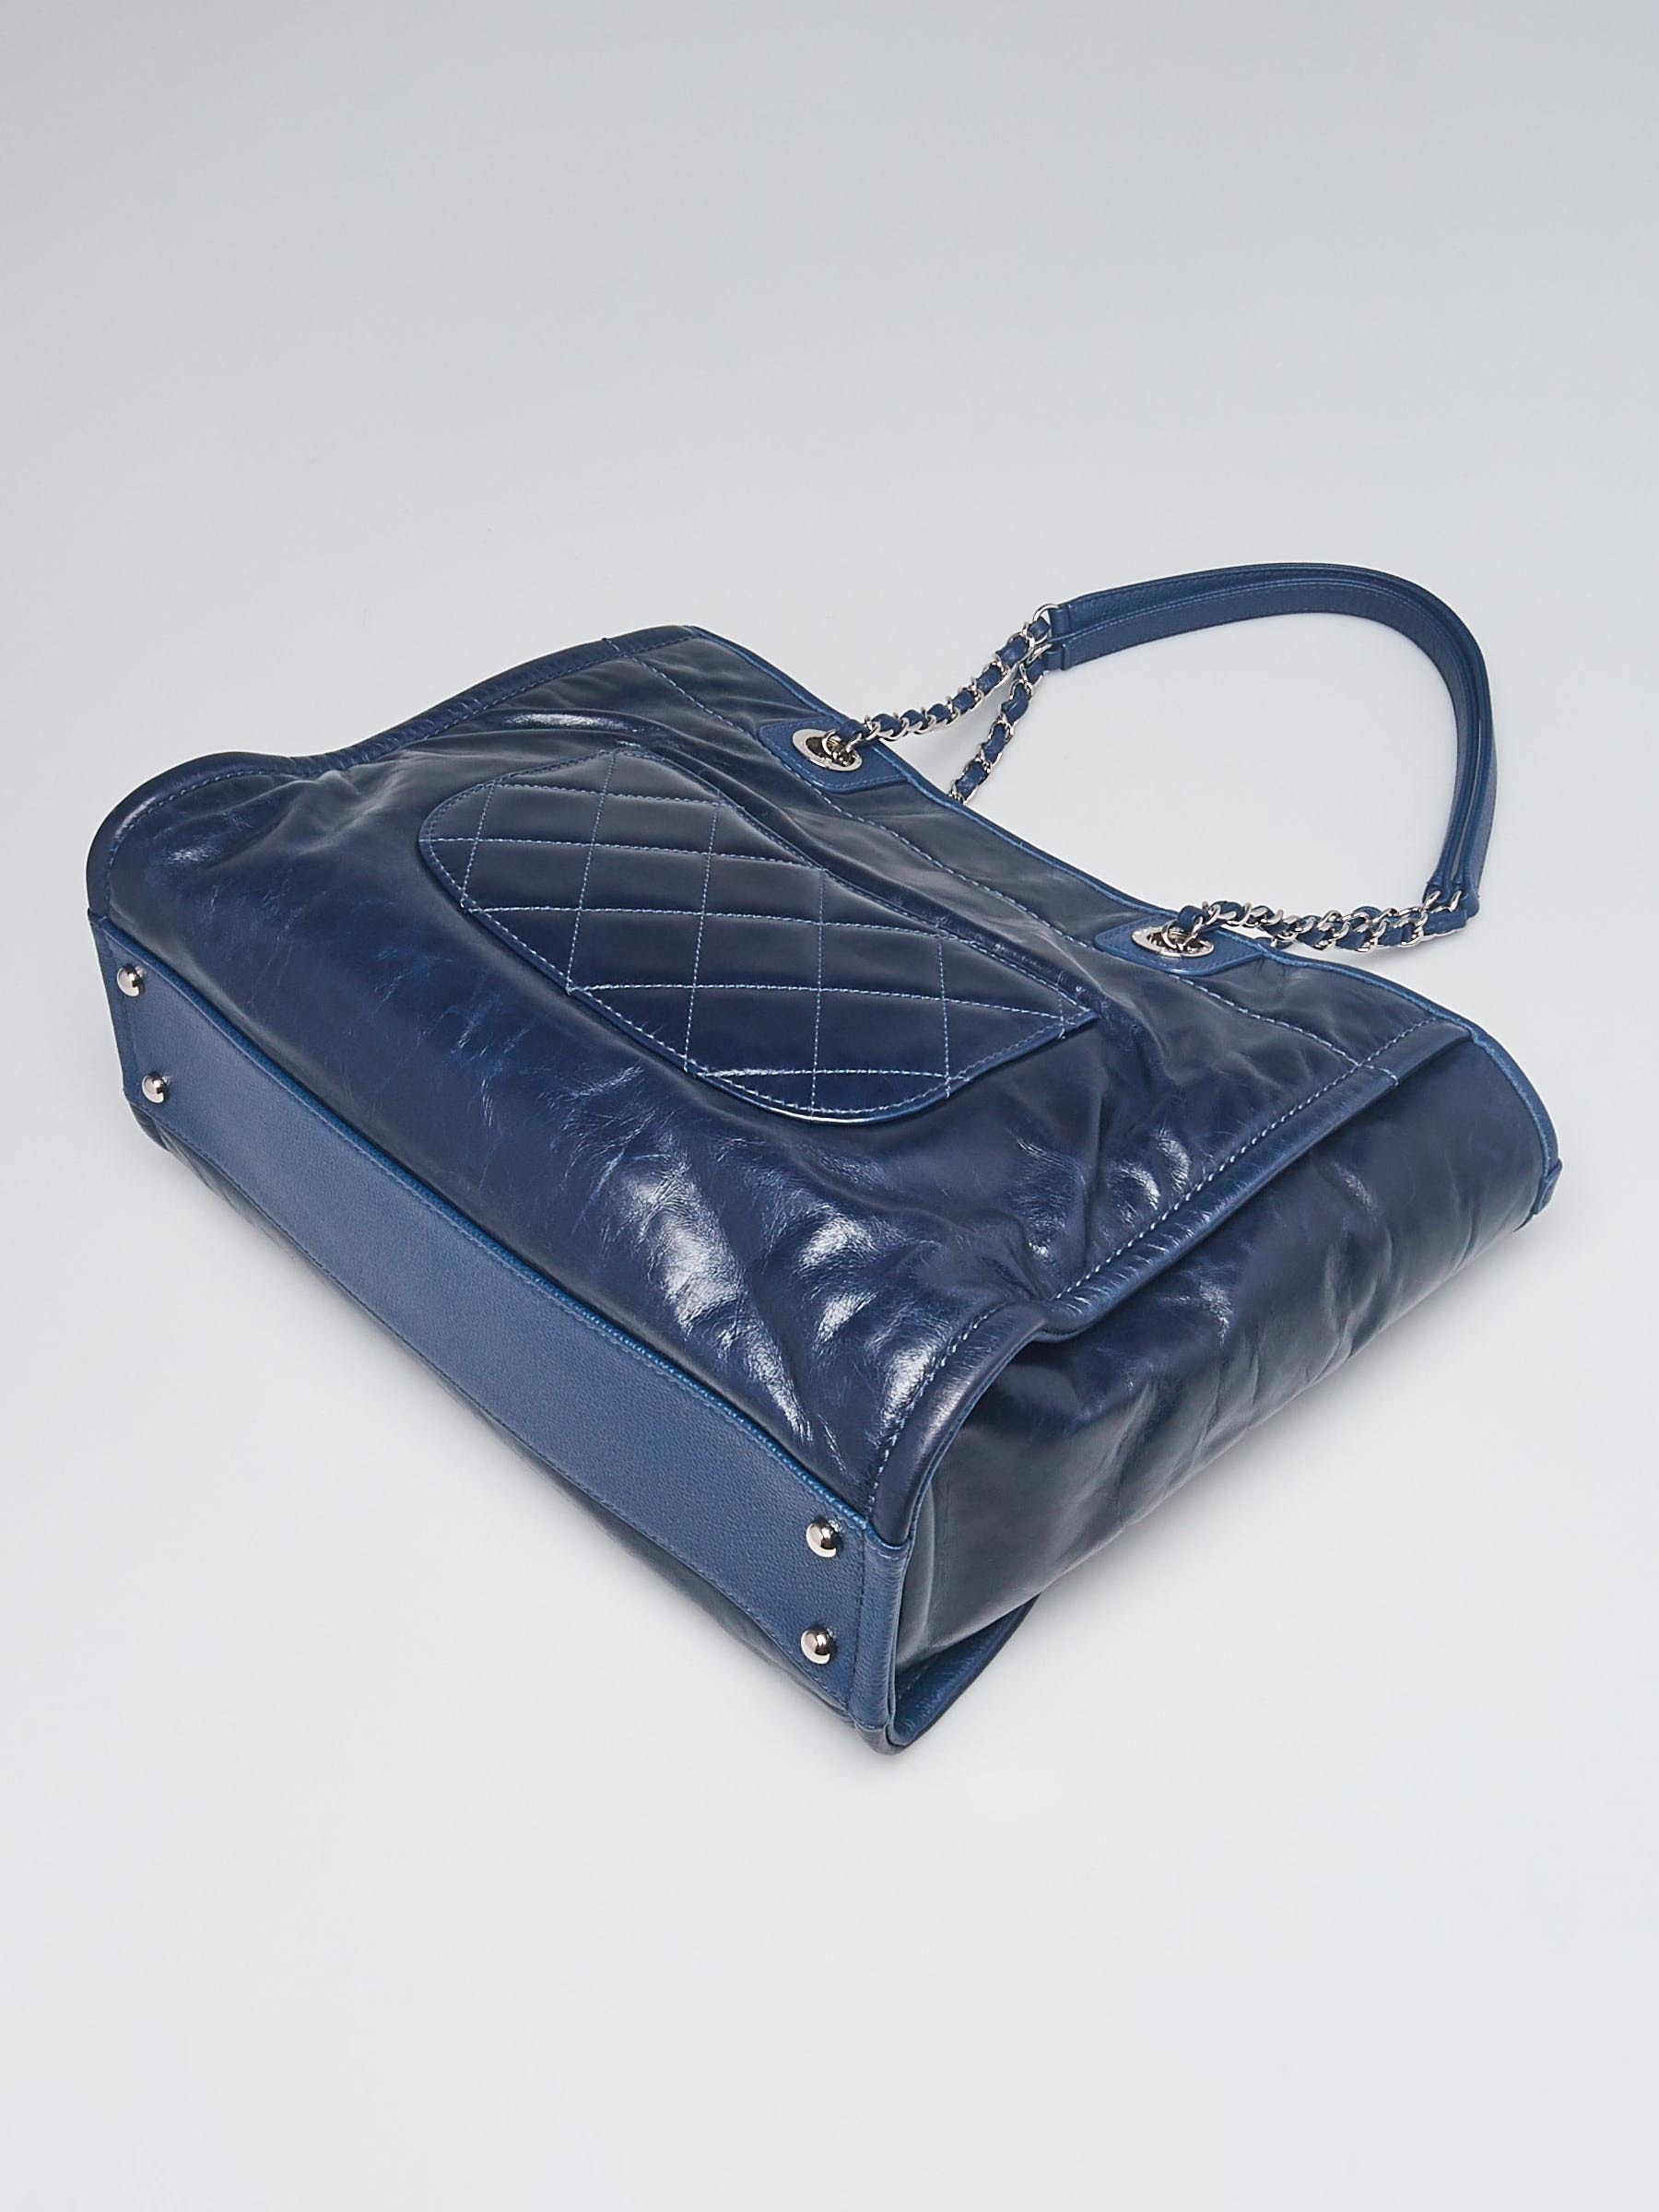 Chanel Navy Blue Glazed Leather Deauville Small Shopping Tote Bag - Yoogi's  Closet